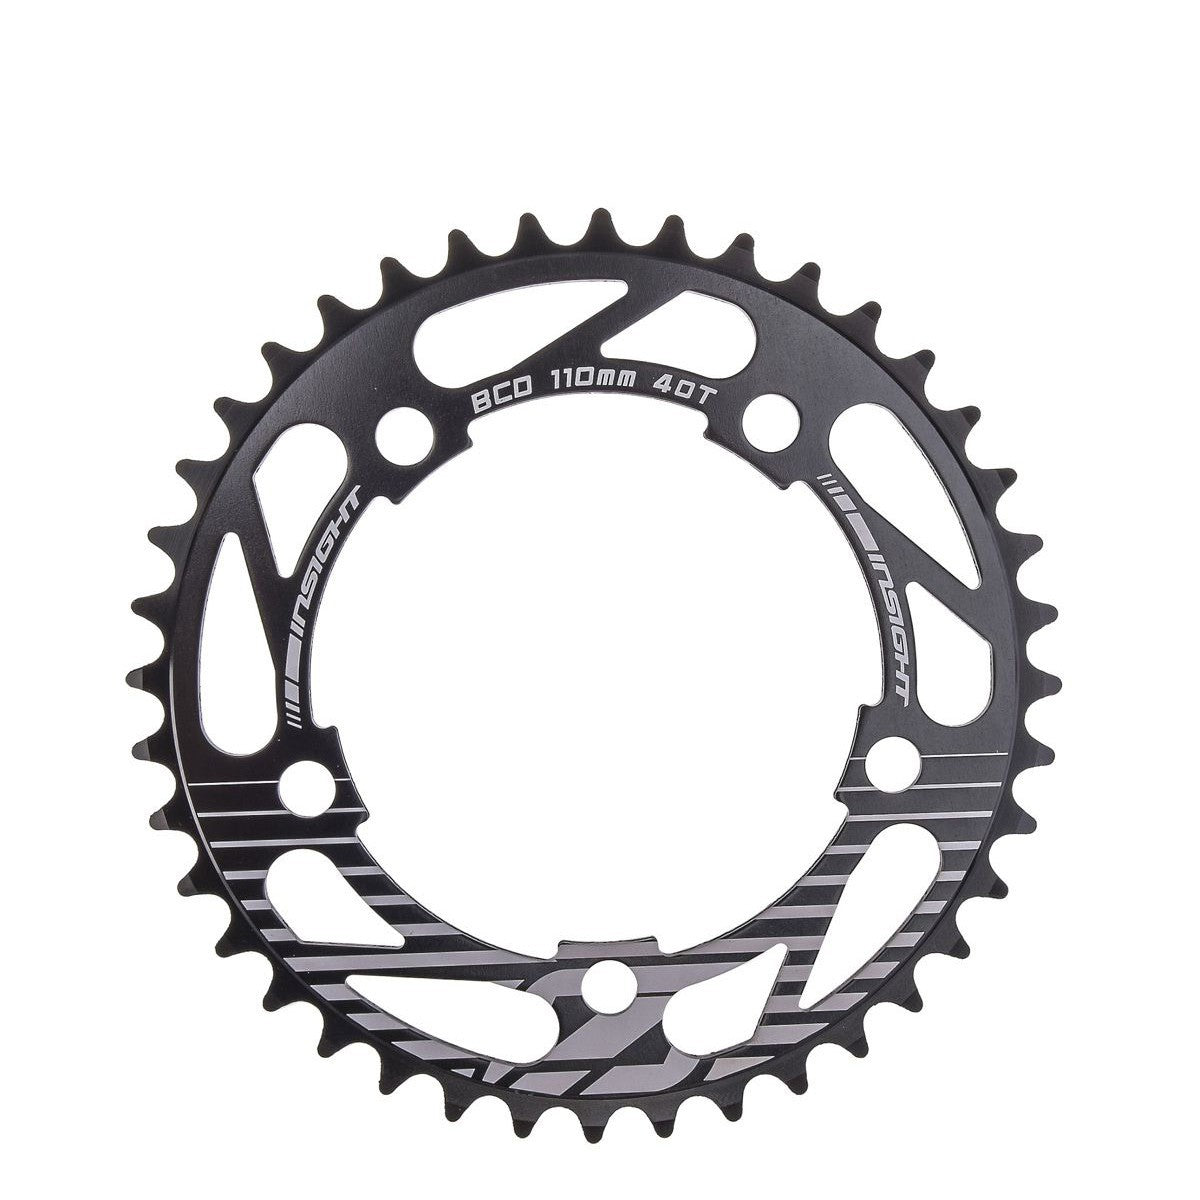 Insight 5 Bolt 110mm Chainring In Black